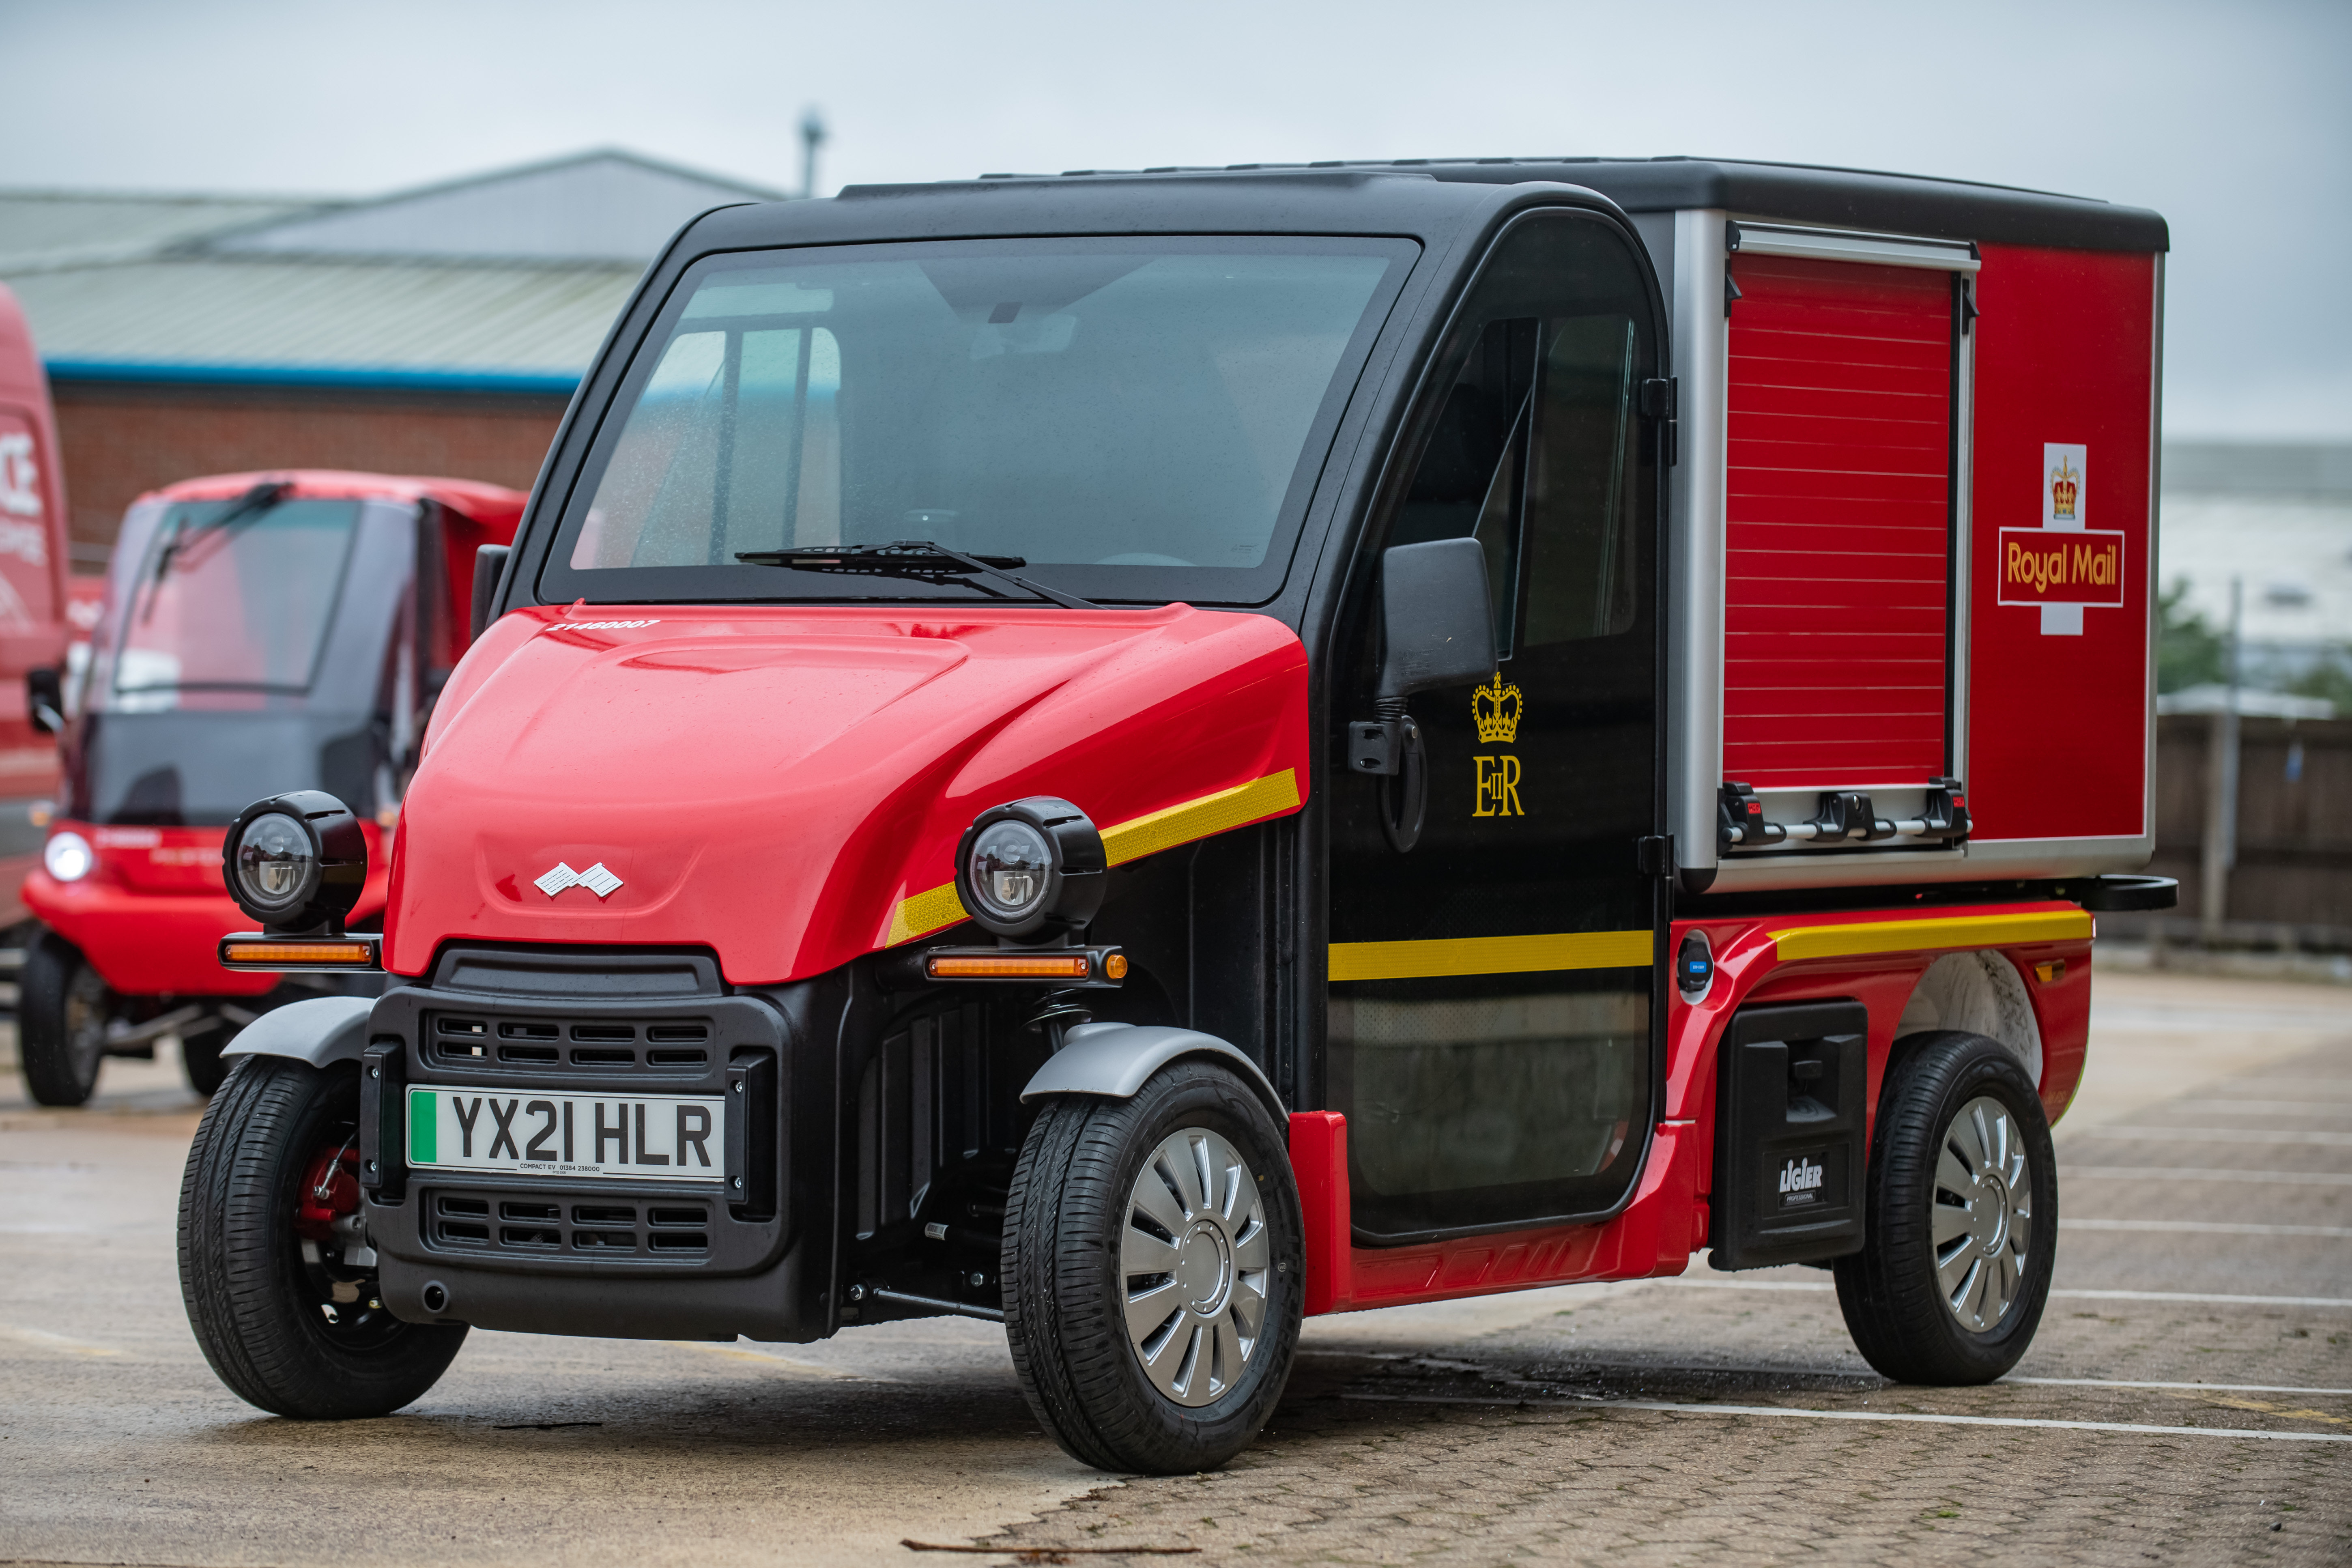 Royal Mail micro electric vehicles emissions postal service Paxster Cargo MEV Ligier Pulse 4 